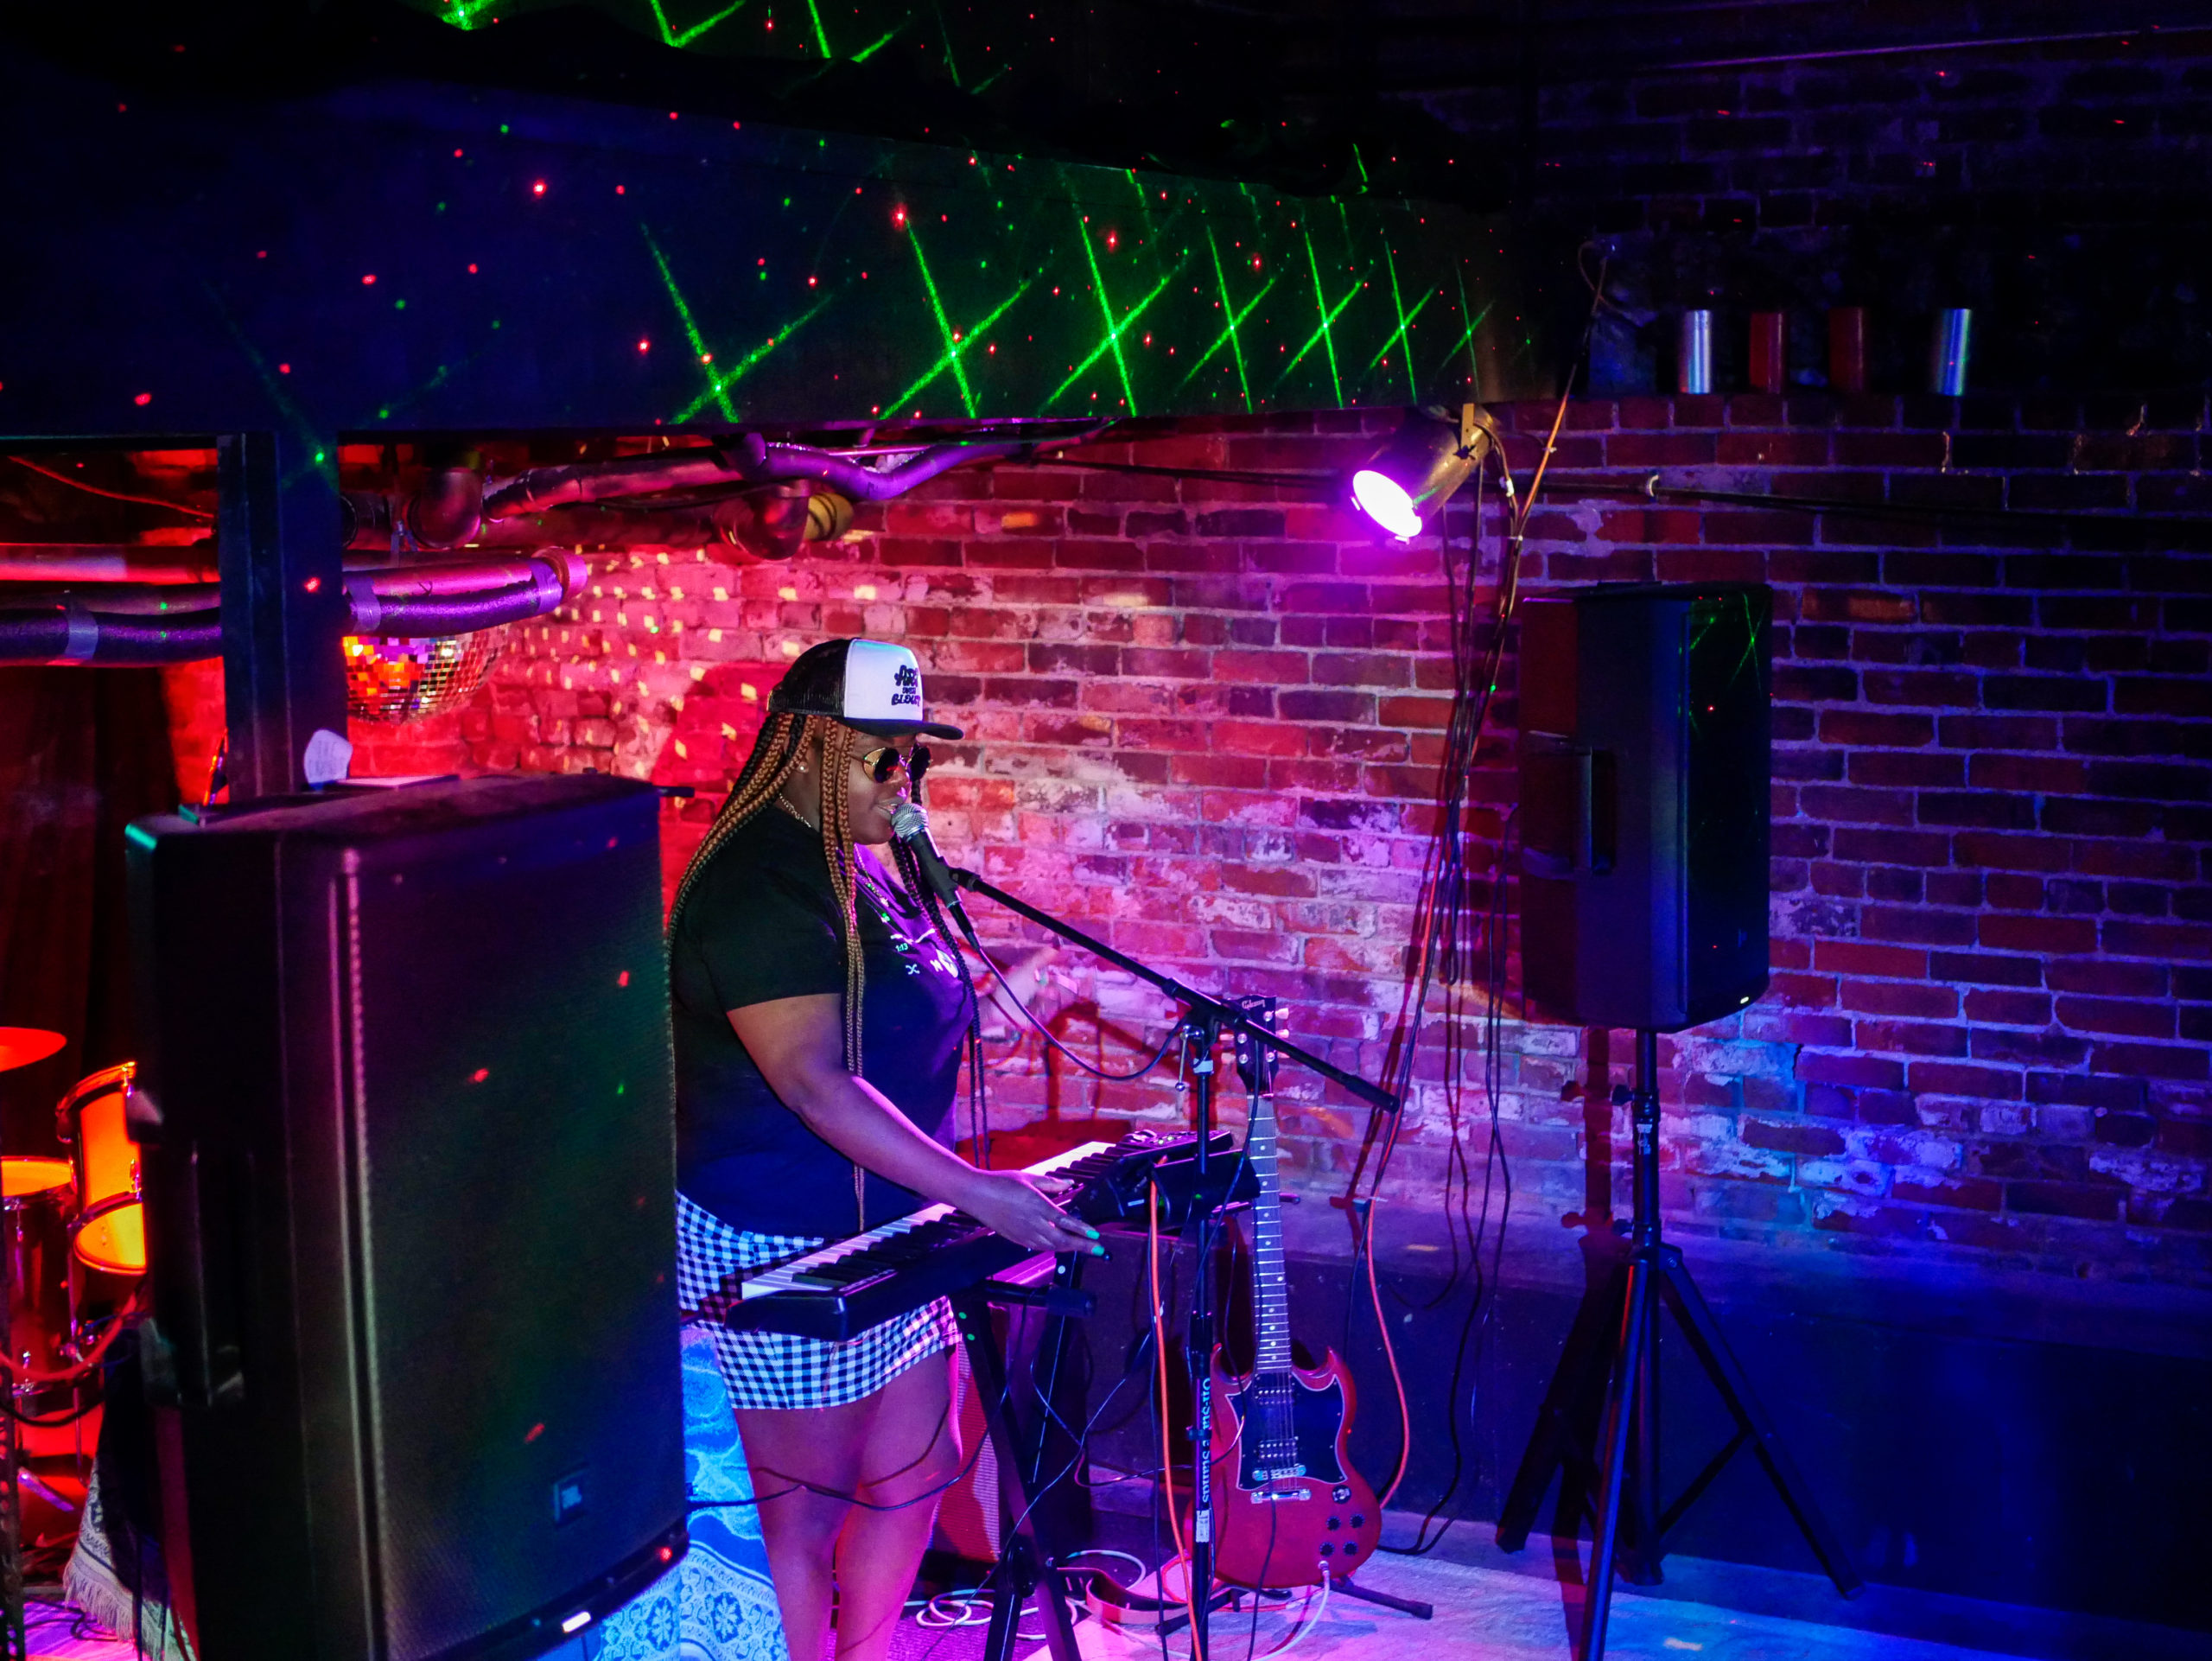 Chicago artist, Ami, performs at The Spot in Rock Island, IL.